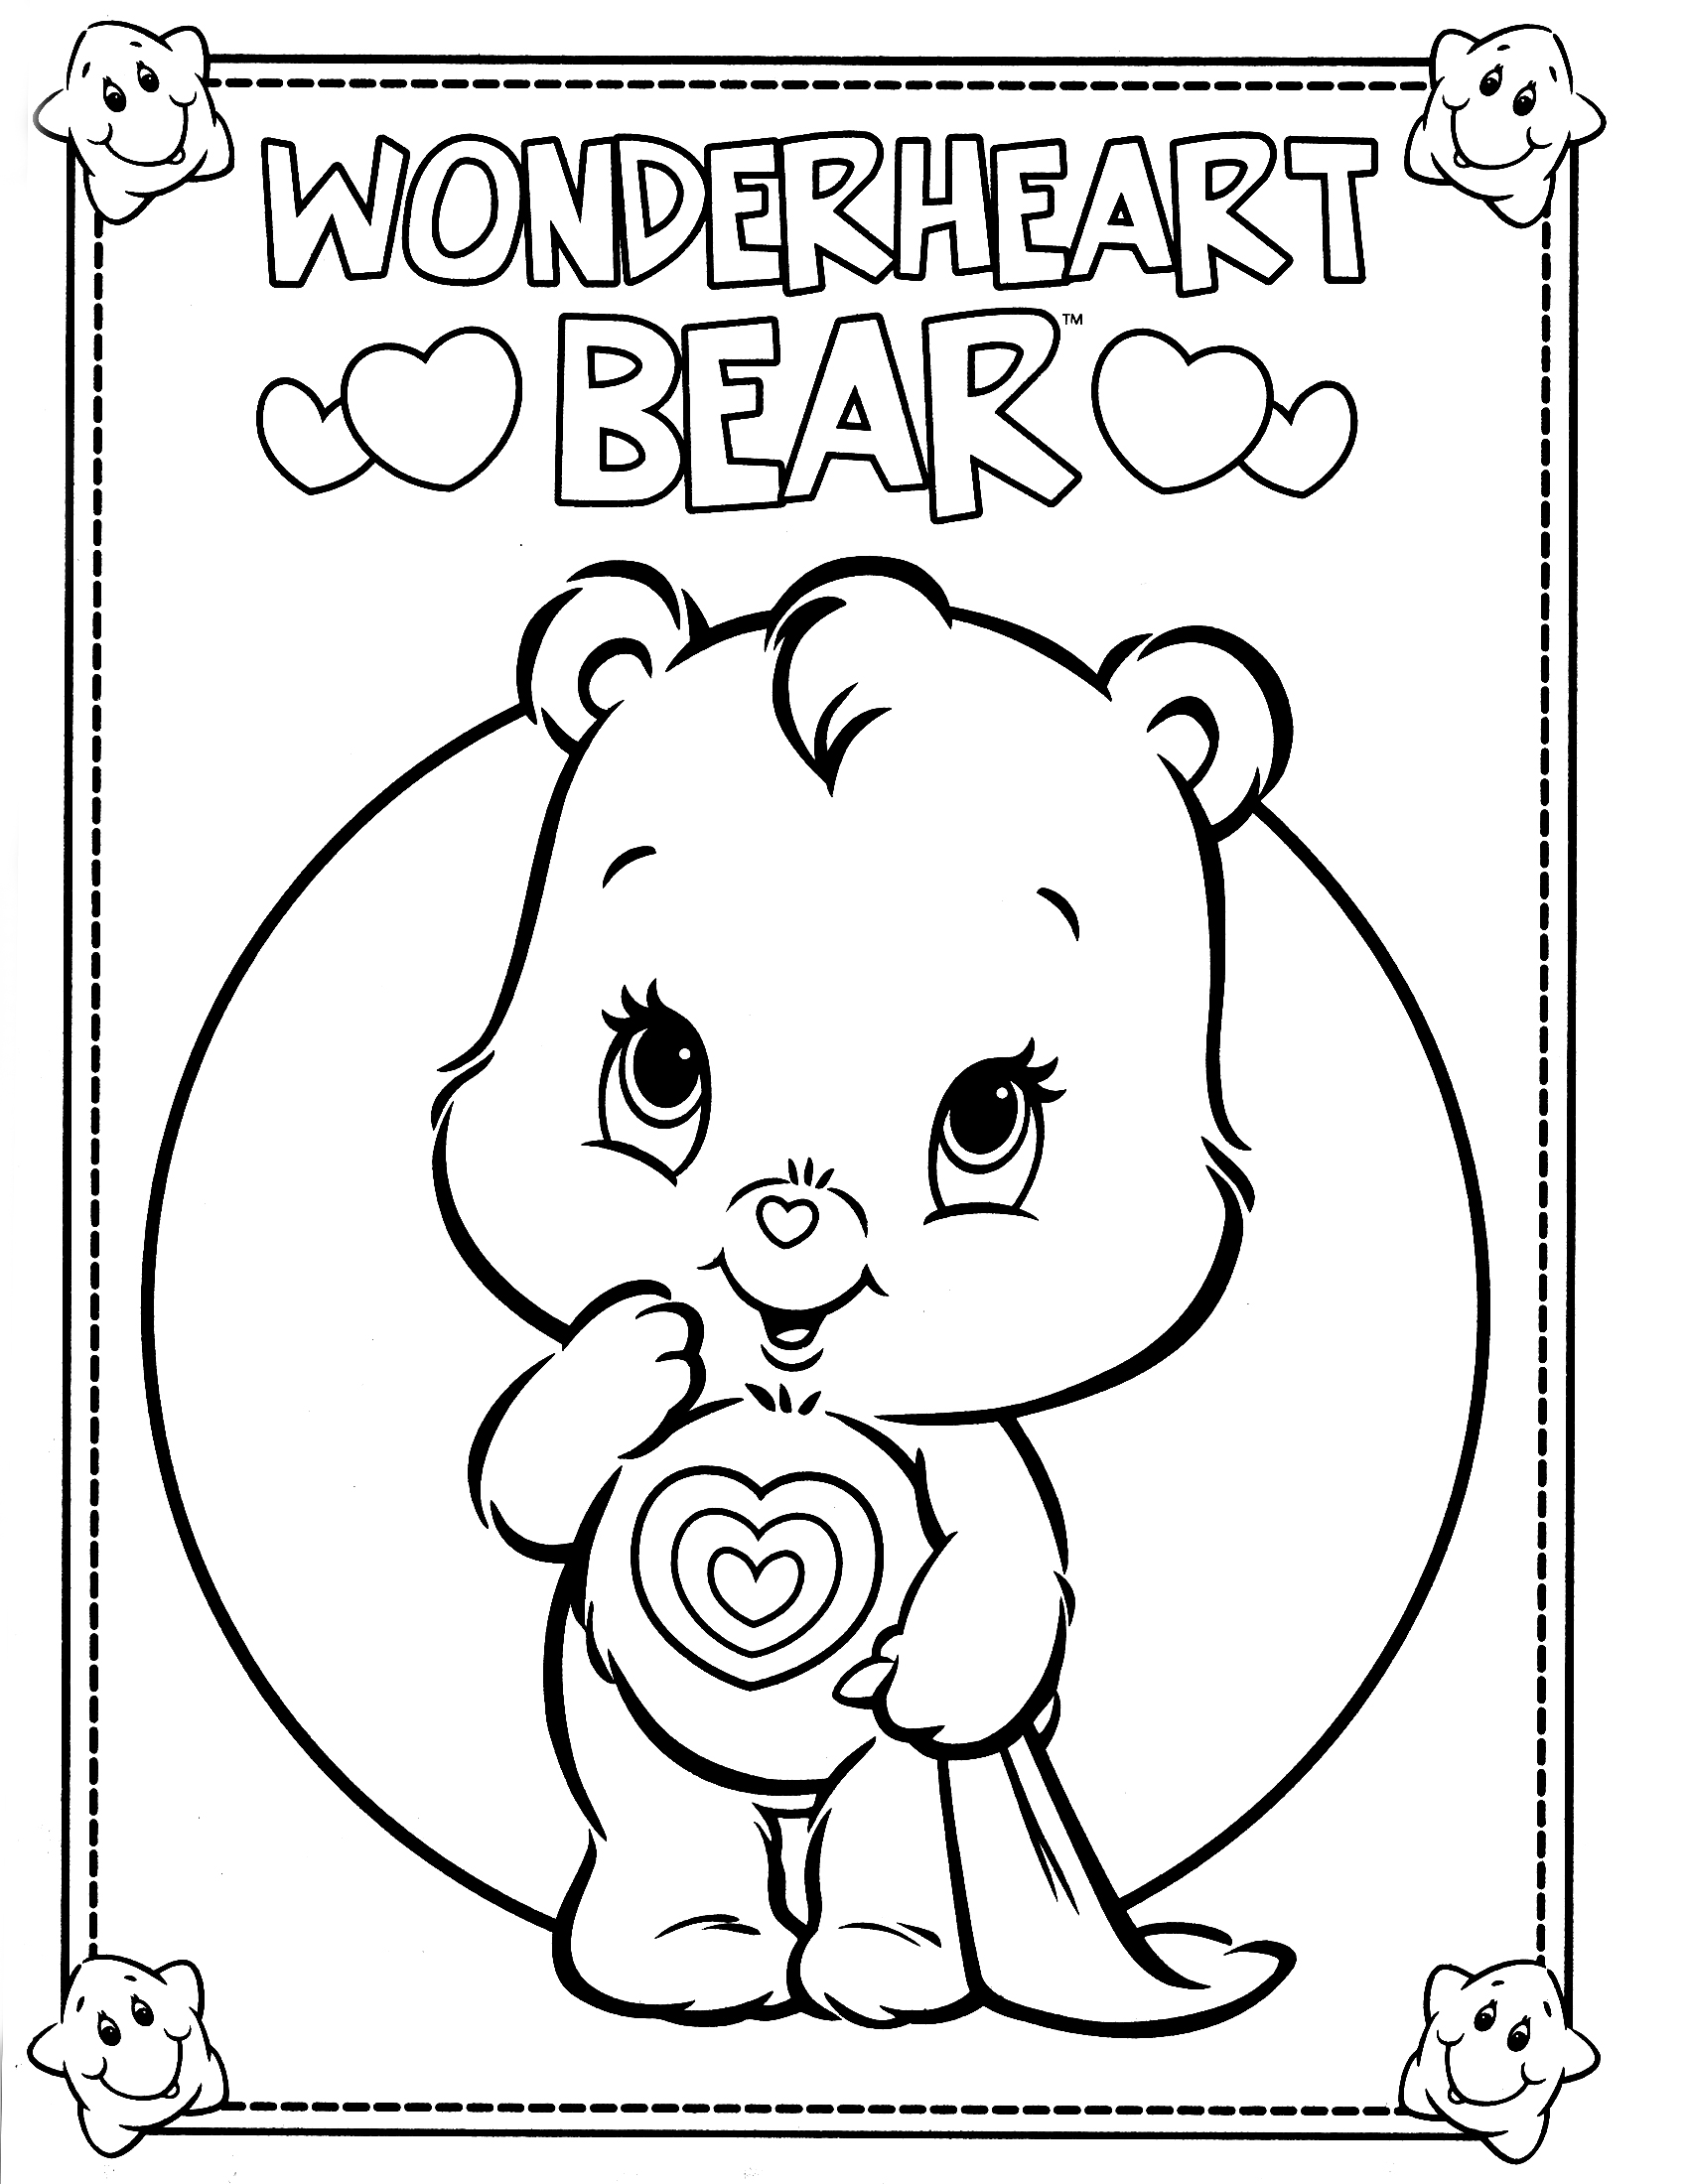 Coloring Page Care Bears Cartoon Coloring For Kids Care Bears